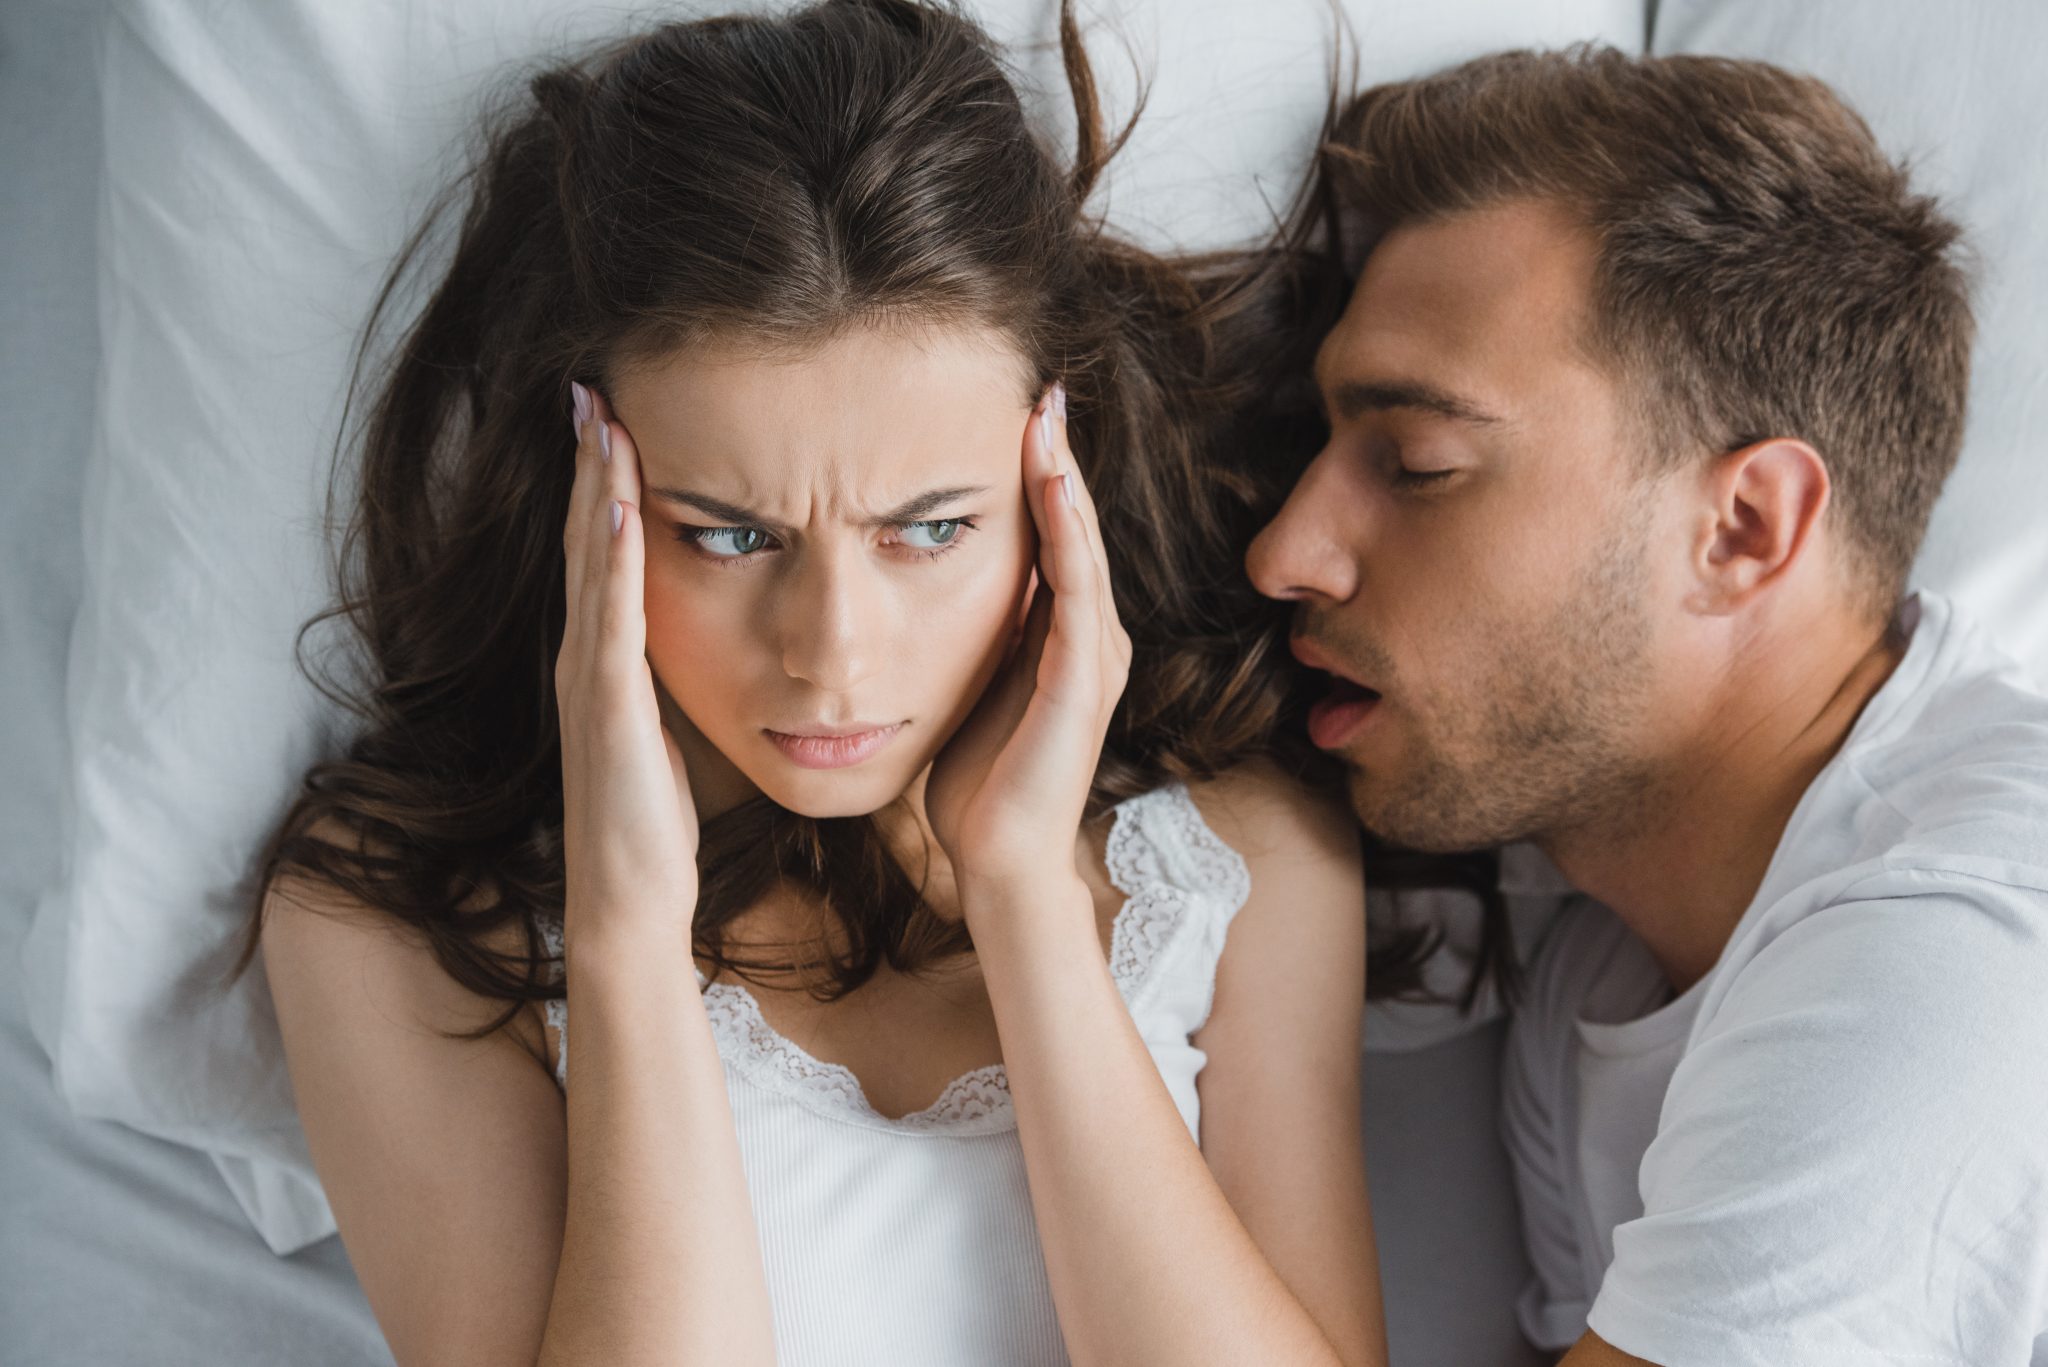 Woman Annoyed with Snoring